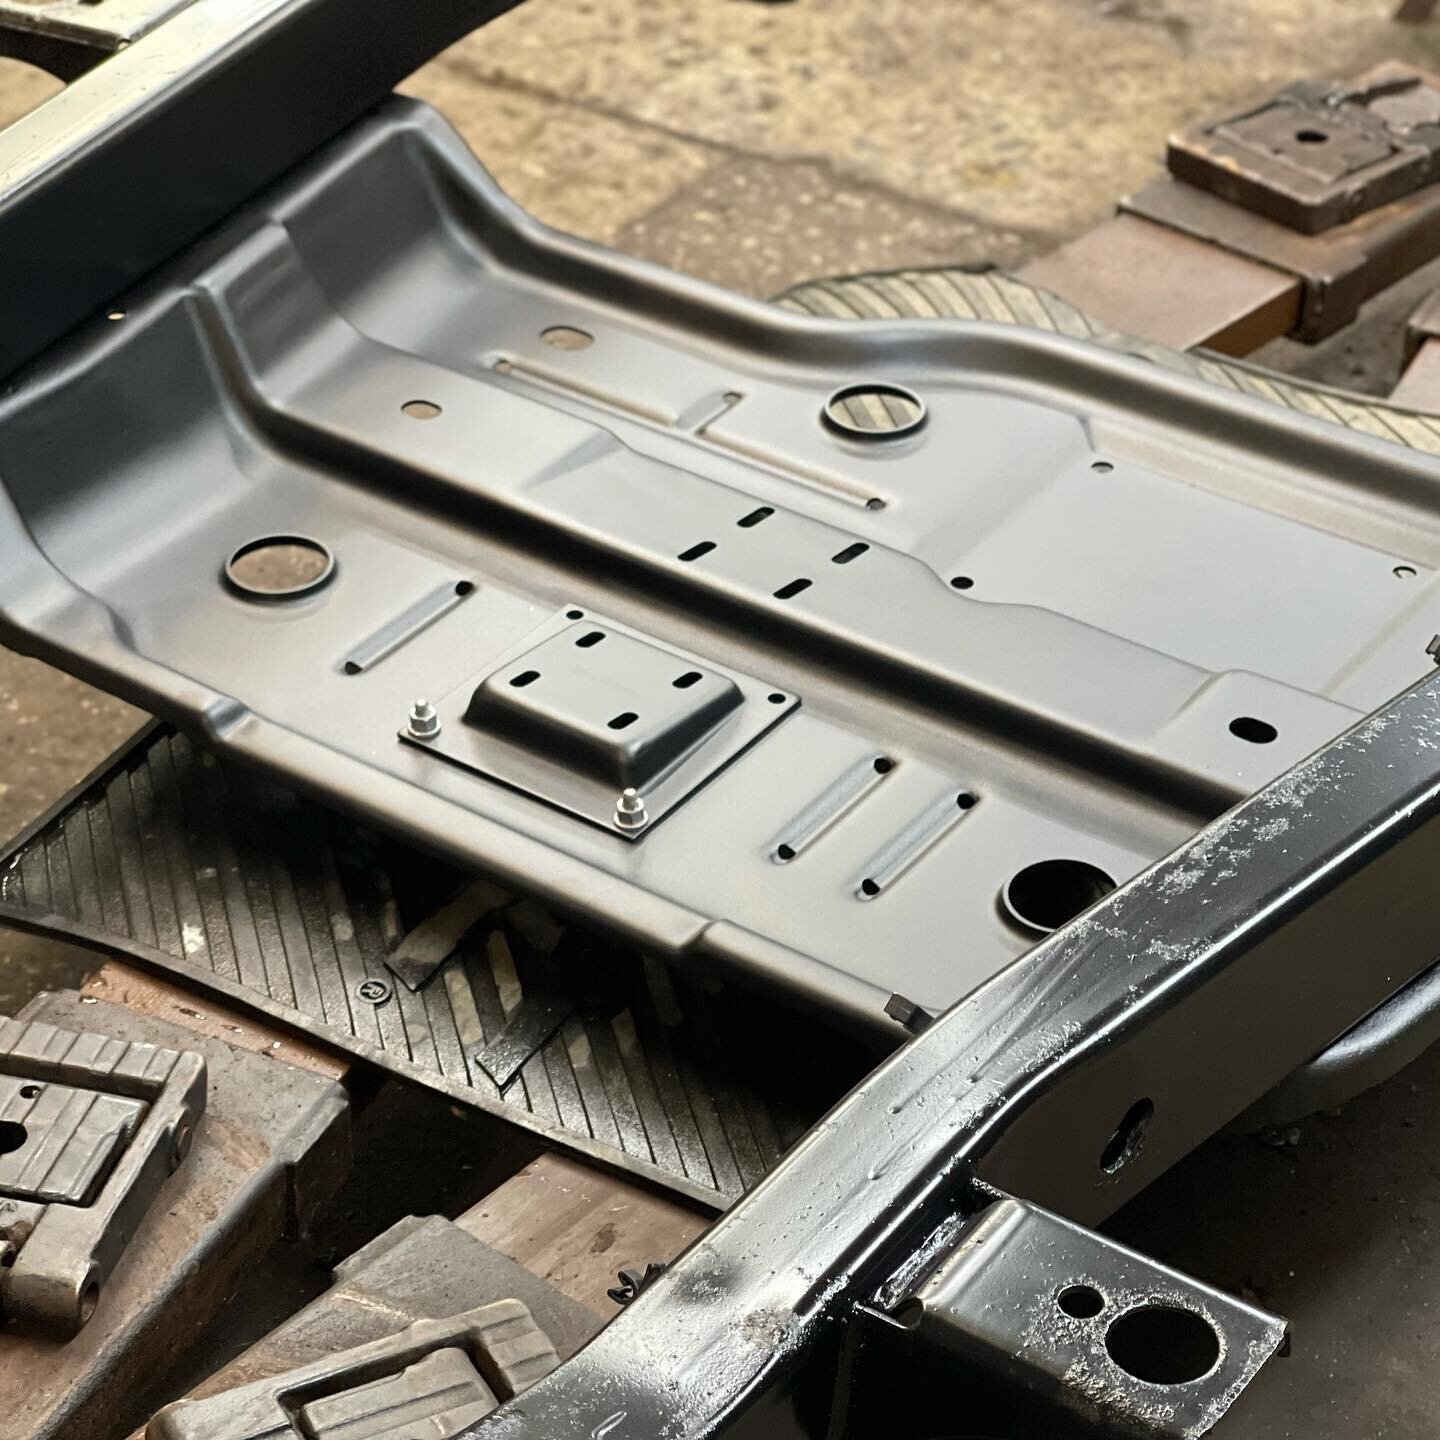 Jeep skid plate restored and freshly coated. Frame swap is underway
.
.
#hazardsky #madeinbaltimore #waterjet #fabrication #builtnotbought #omax #maxiem #jeep #powdercoating #jeep